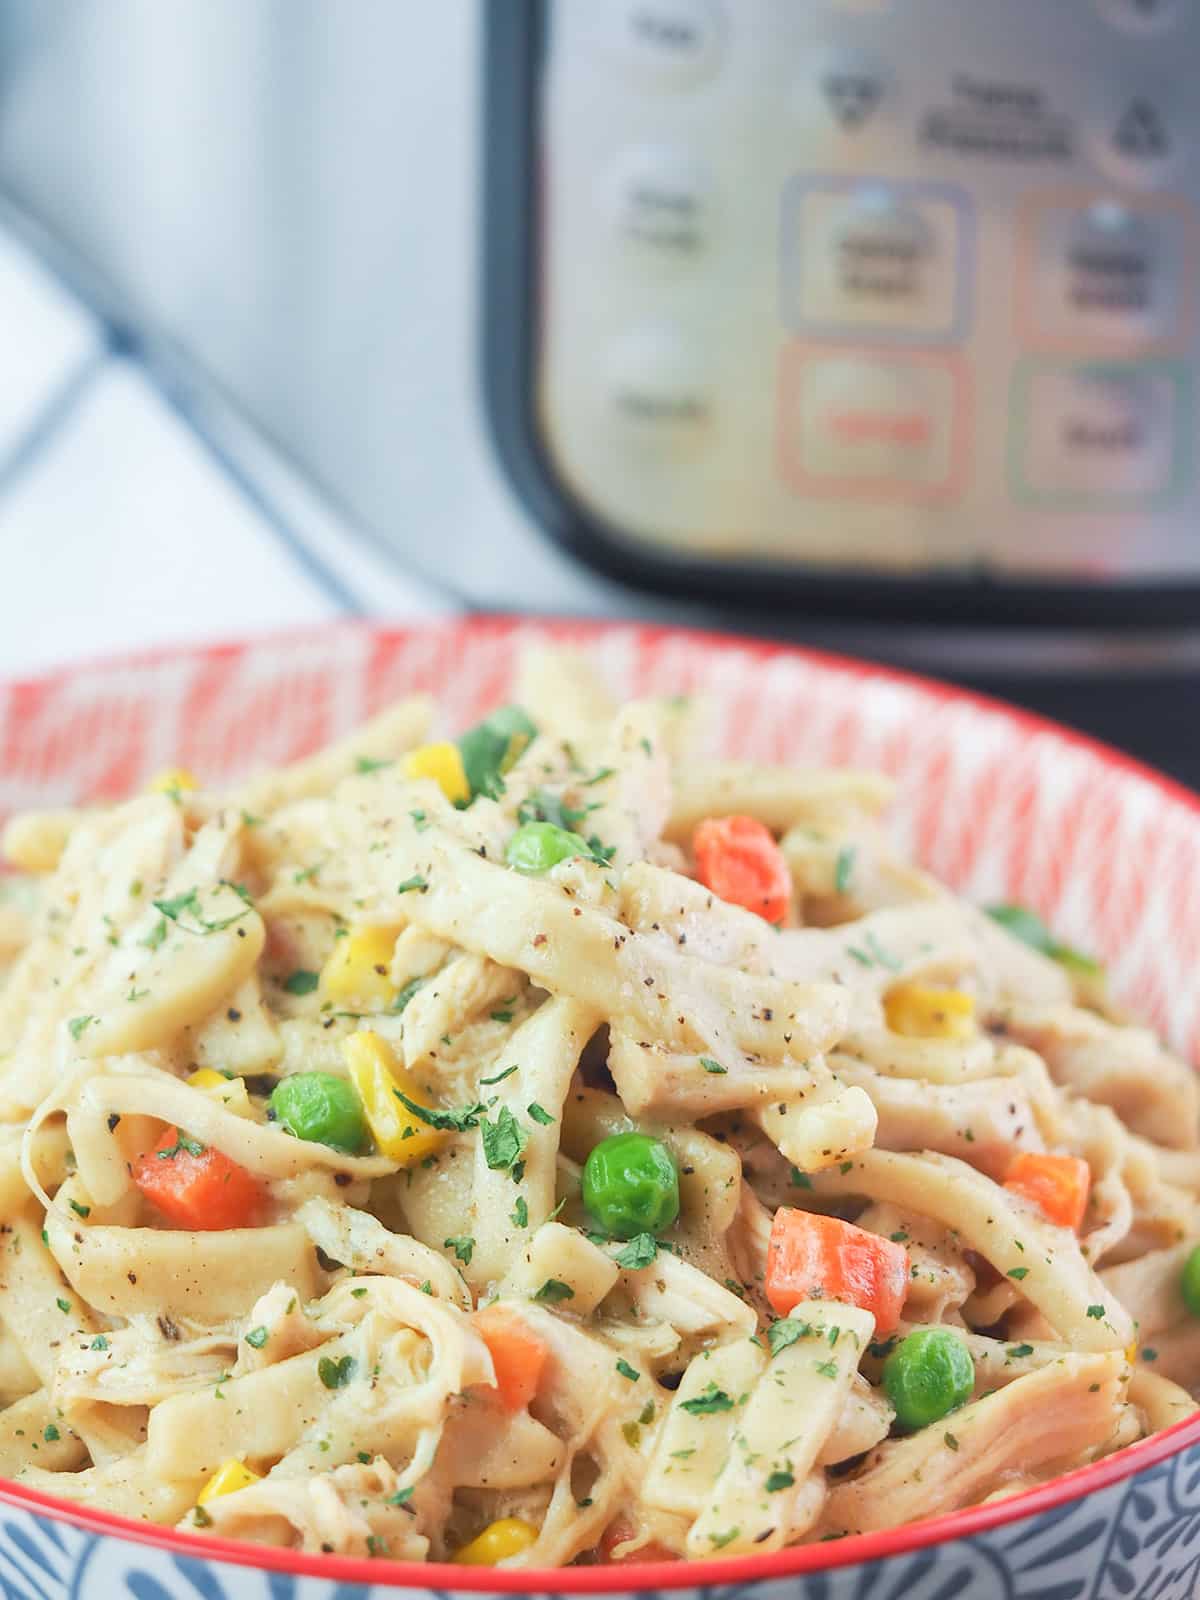 chicken noodles with vegetables in bowl in front of instant pot